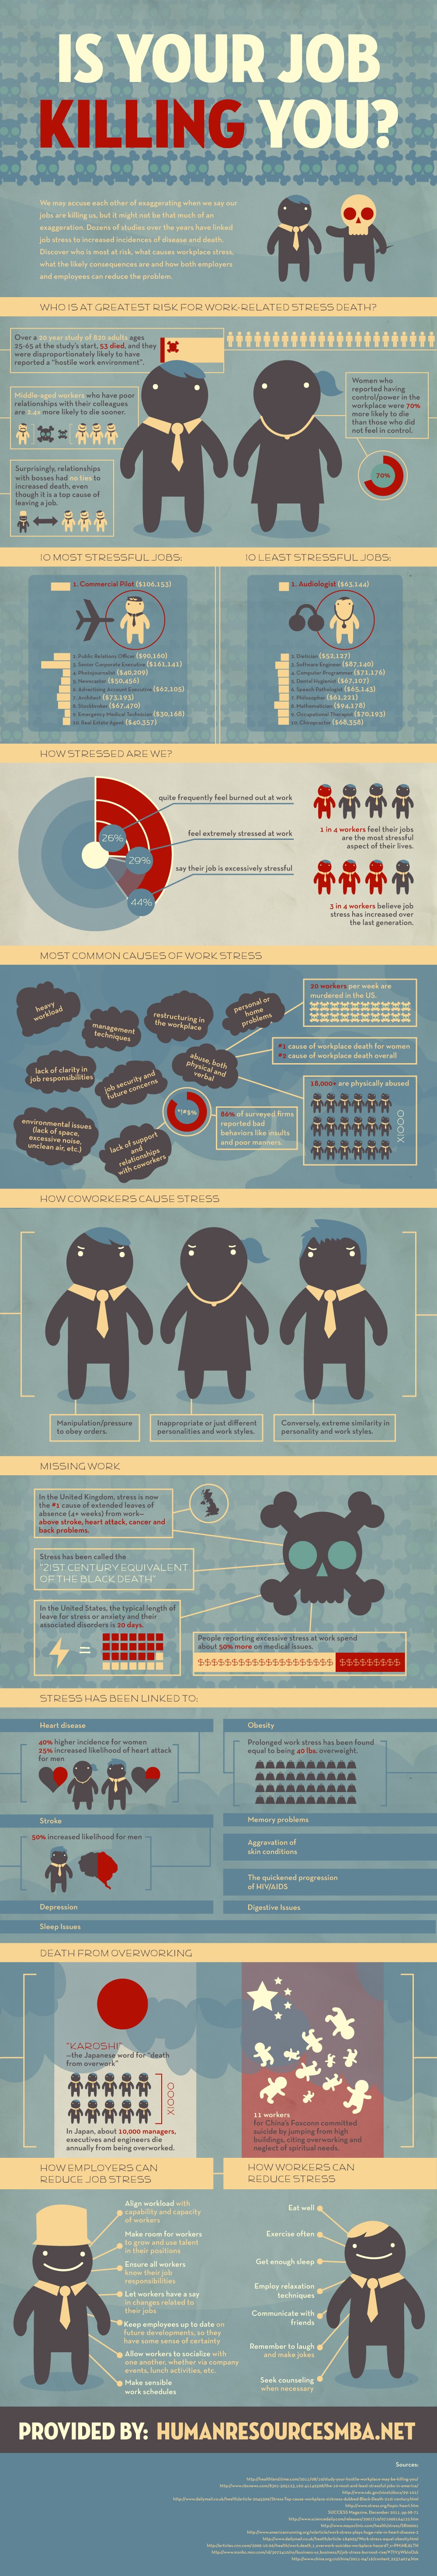 Is Your Job Killing You? [Infographic]